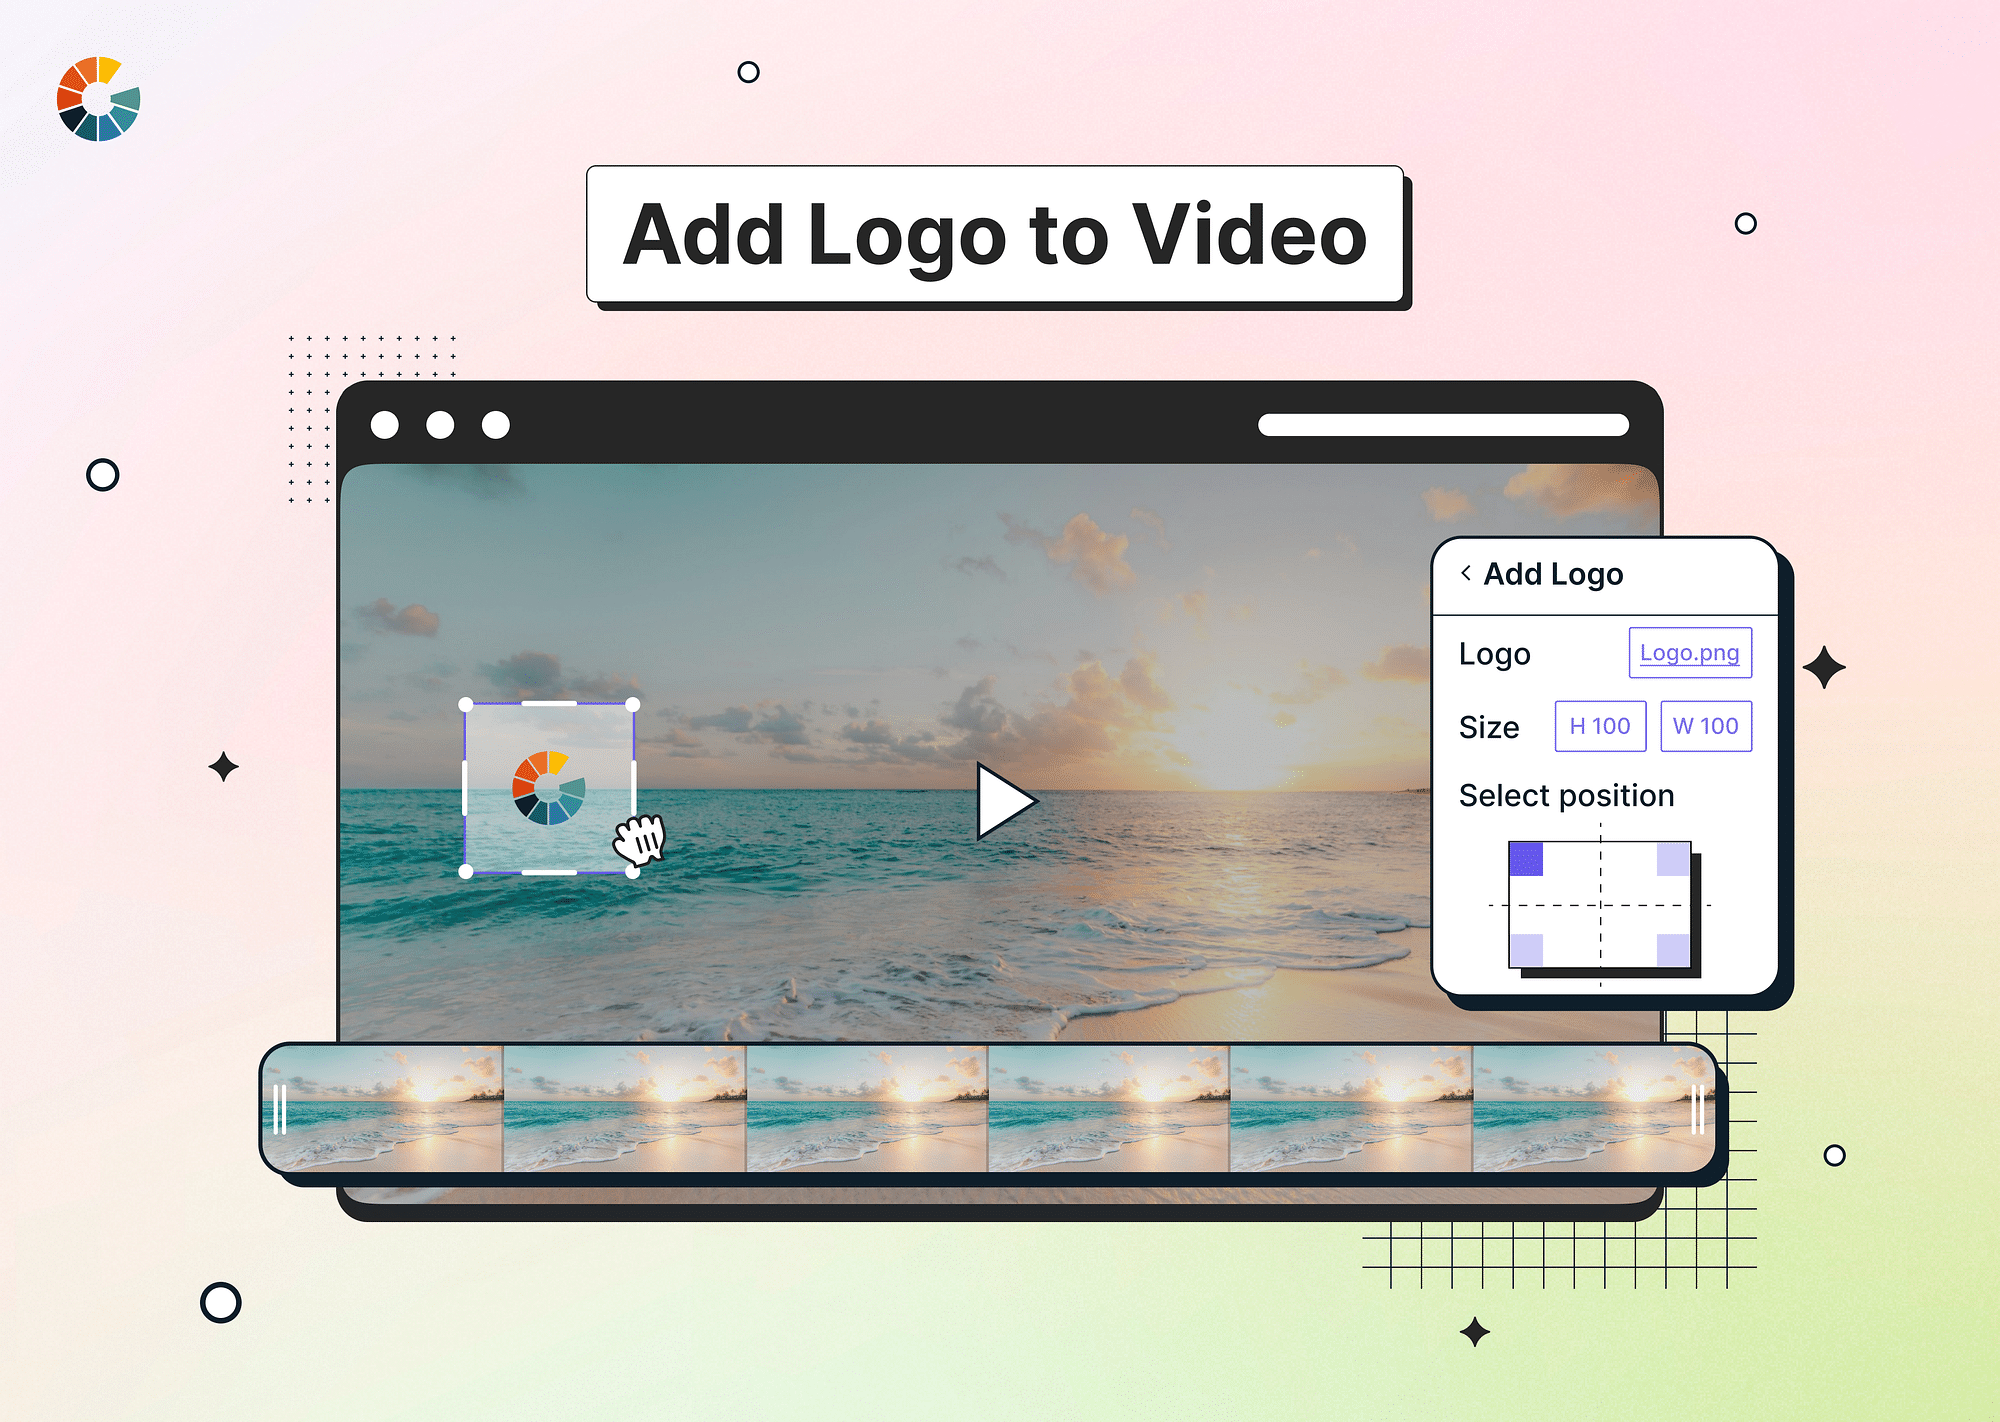 How to Add a Logo to Your Video?